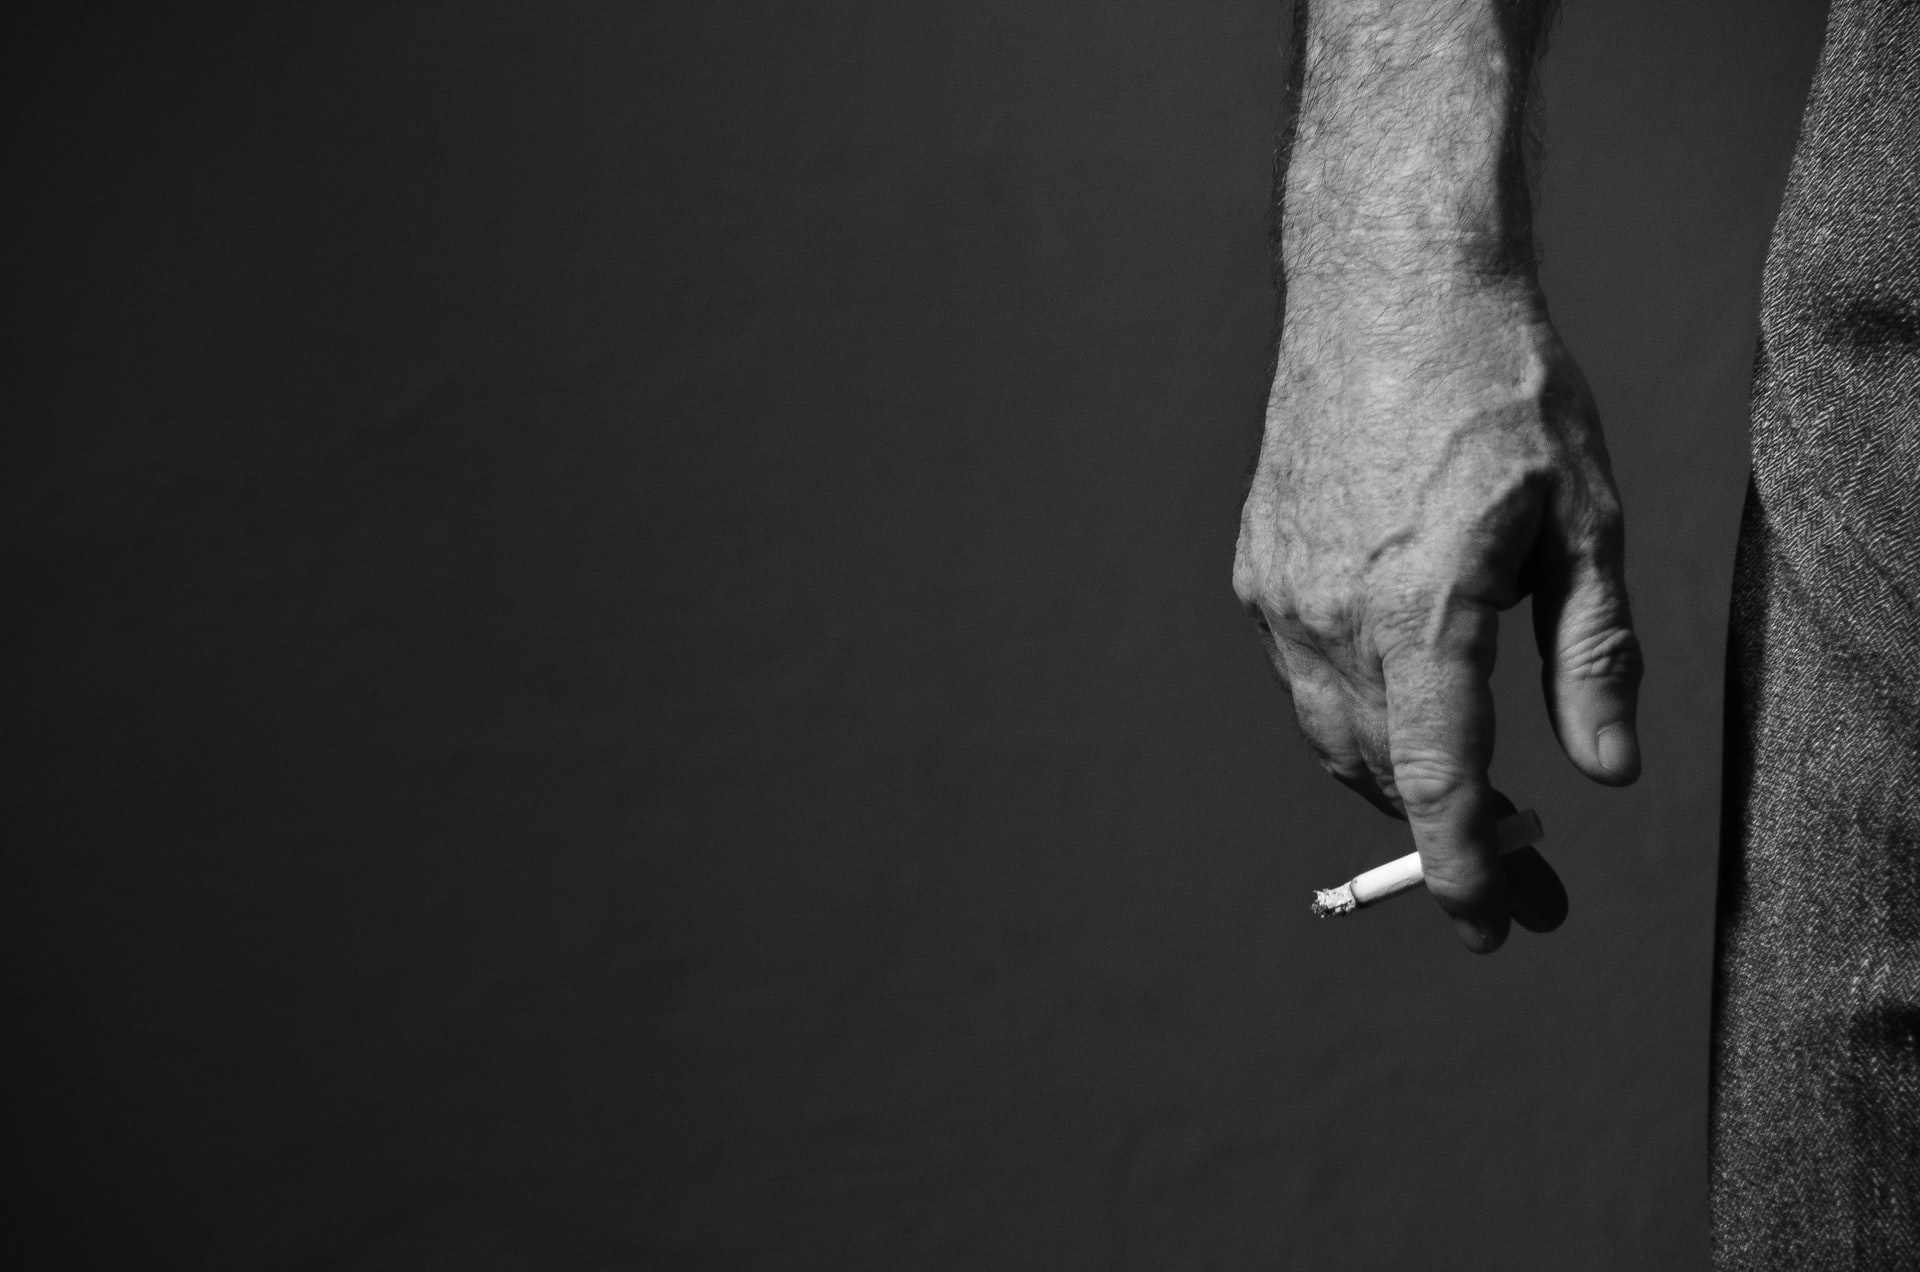 A man holding a lit cigarette by his side.